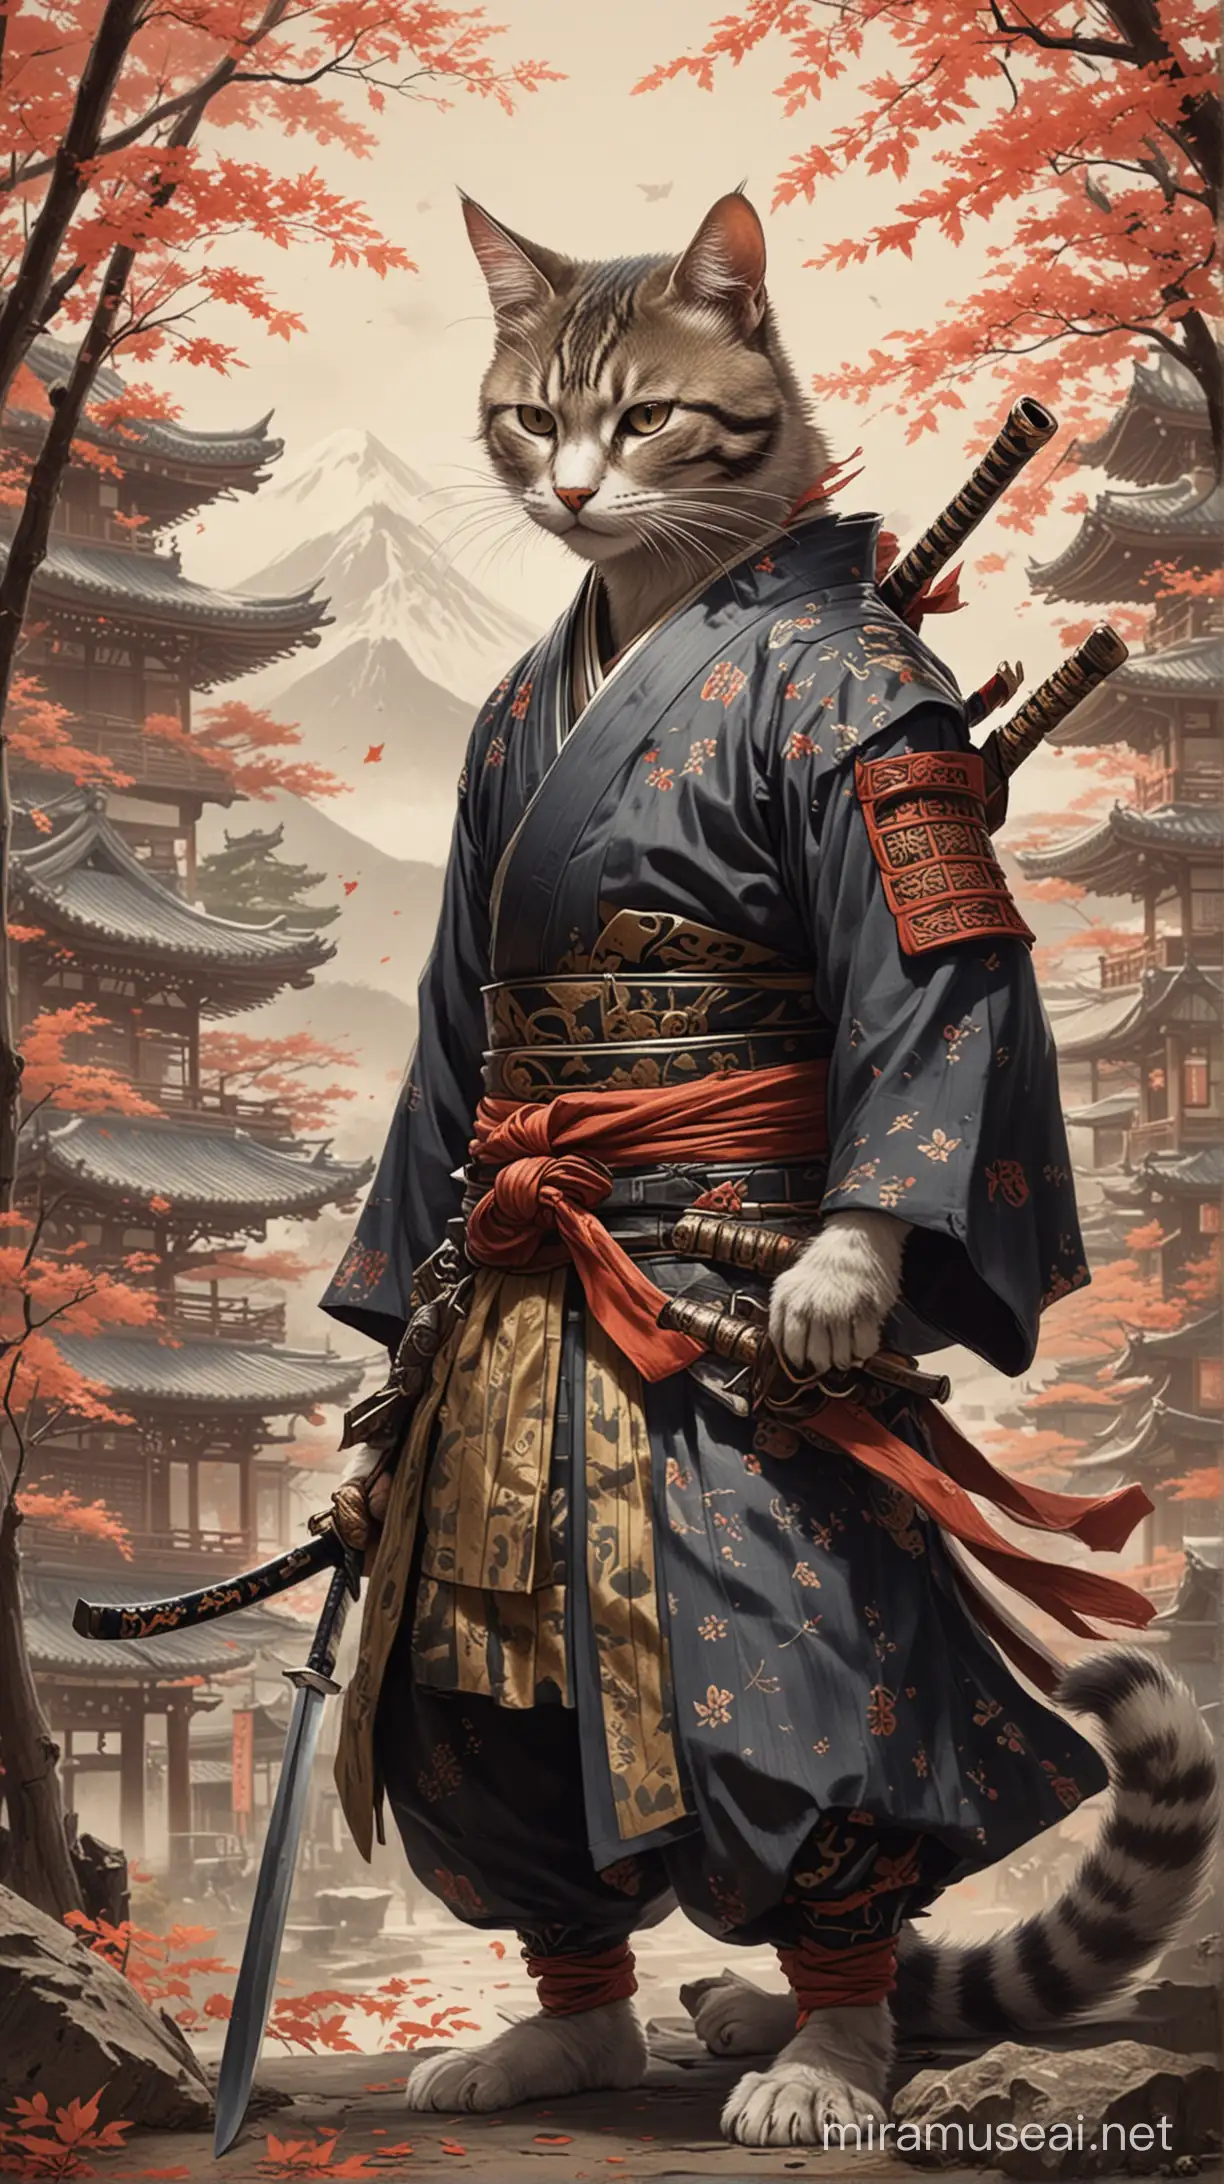 draw a stylized Samurai, with a cat's head and cat's limbs. add medieval Japan paraphernalia in the background